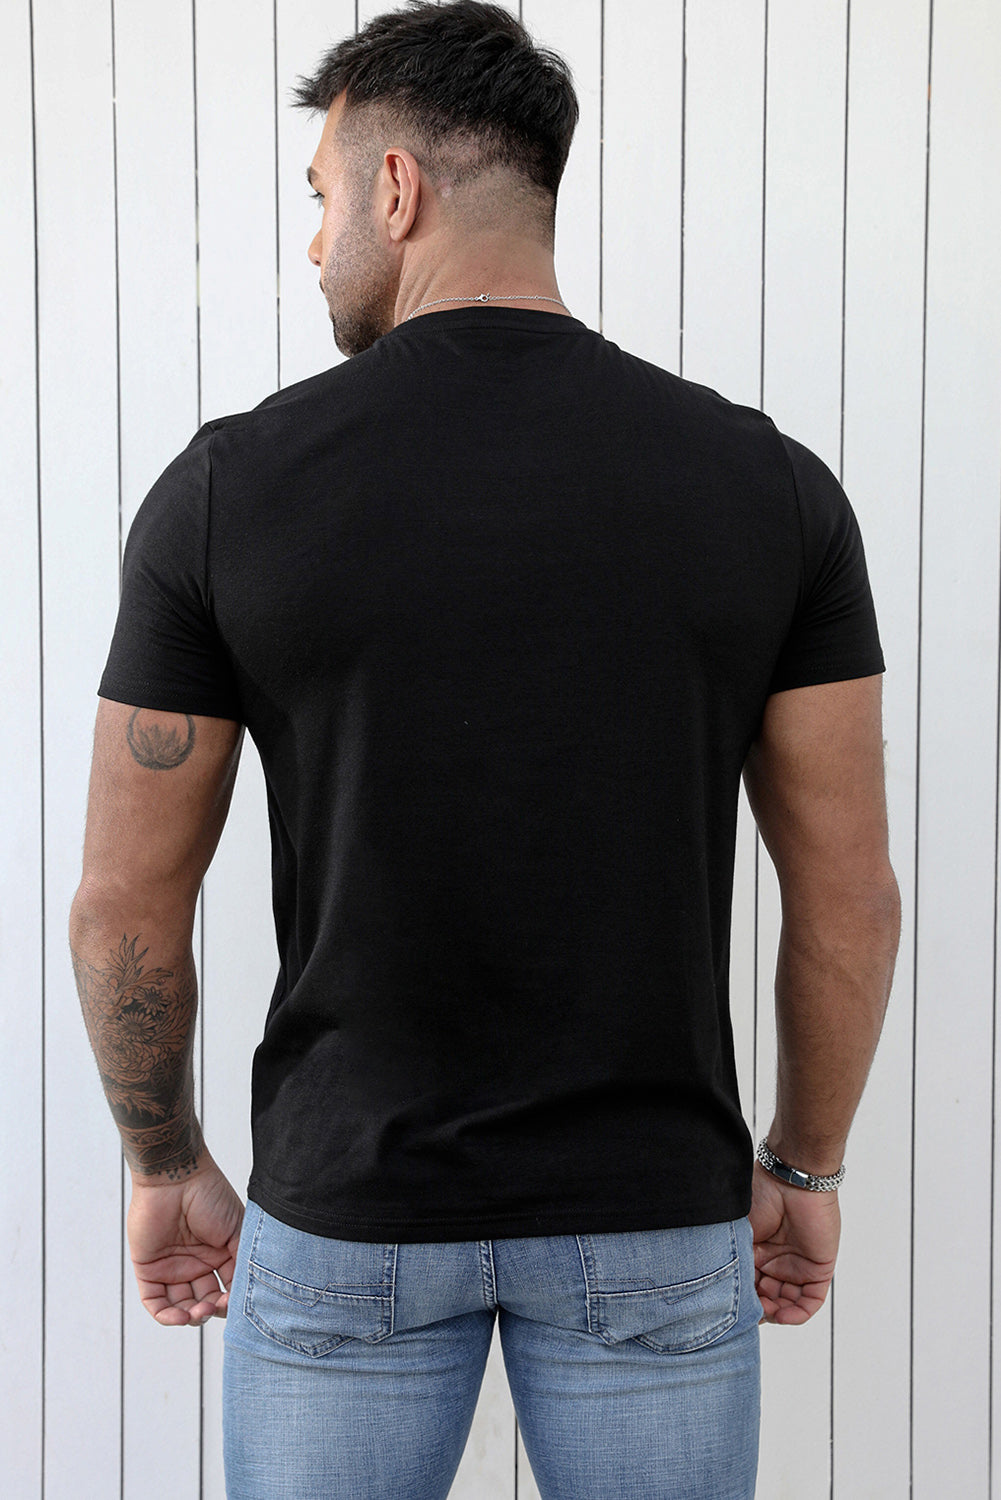 Black Tequila May Not Be The Answer Mens Tee Men's Tops JT's Designer Fashion